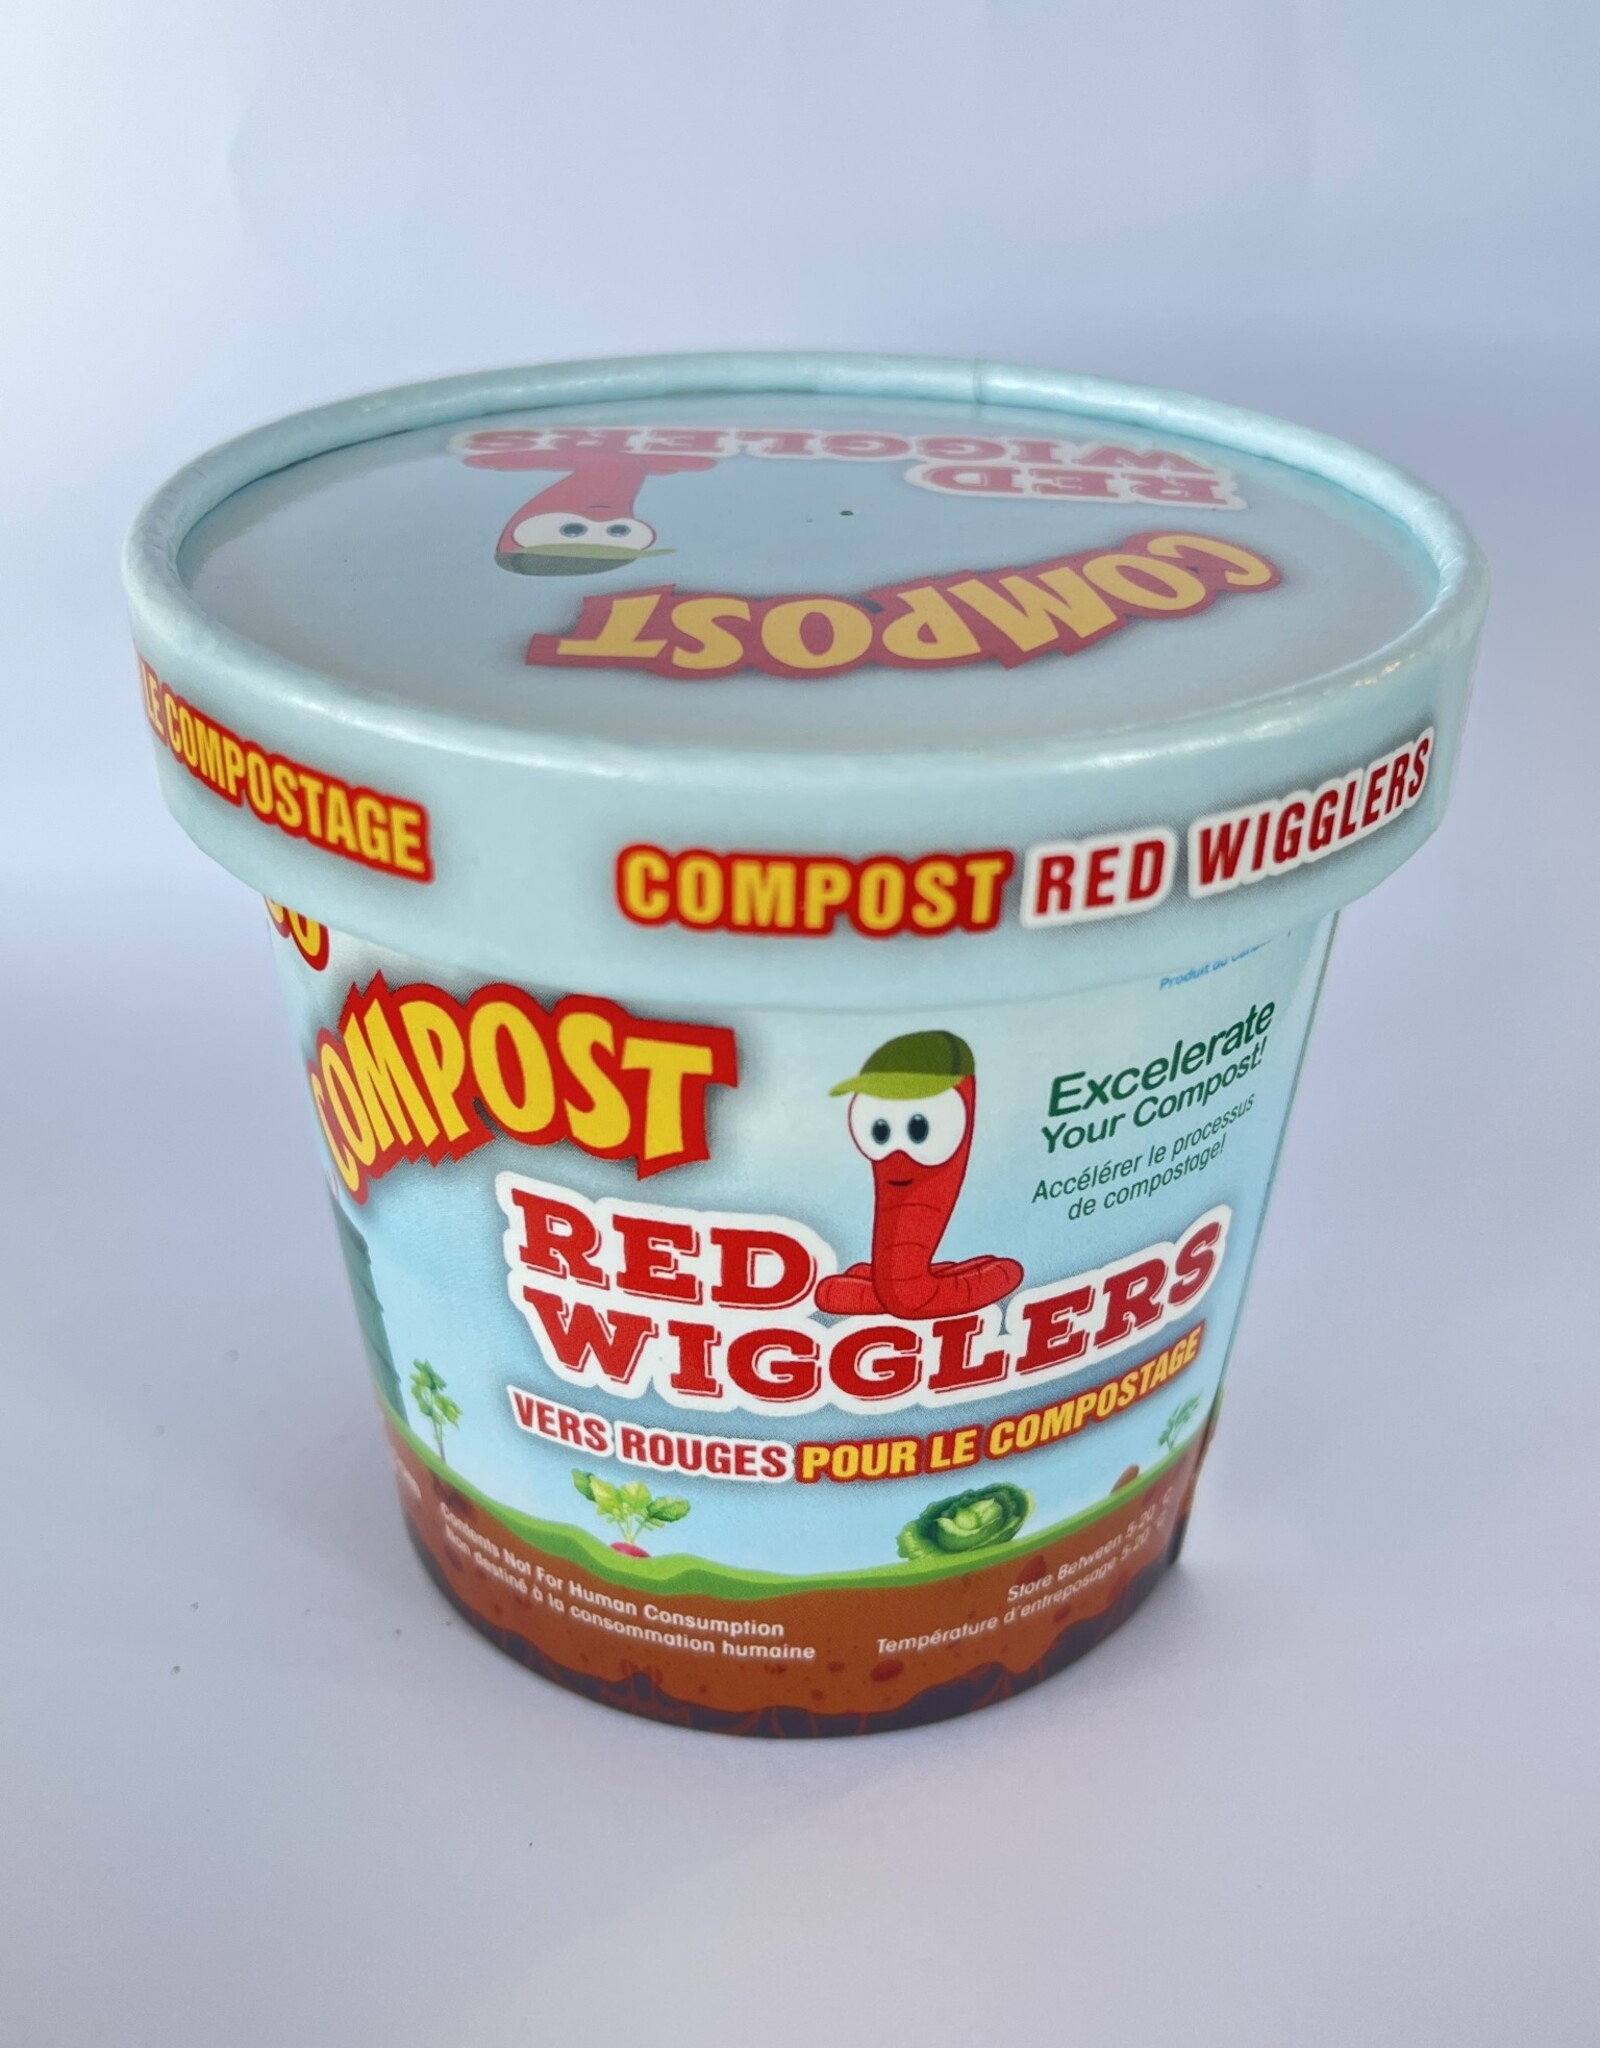 Compost Red Wigglers